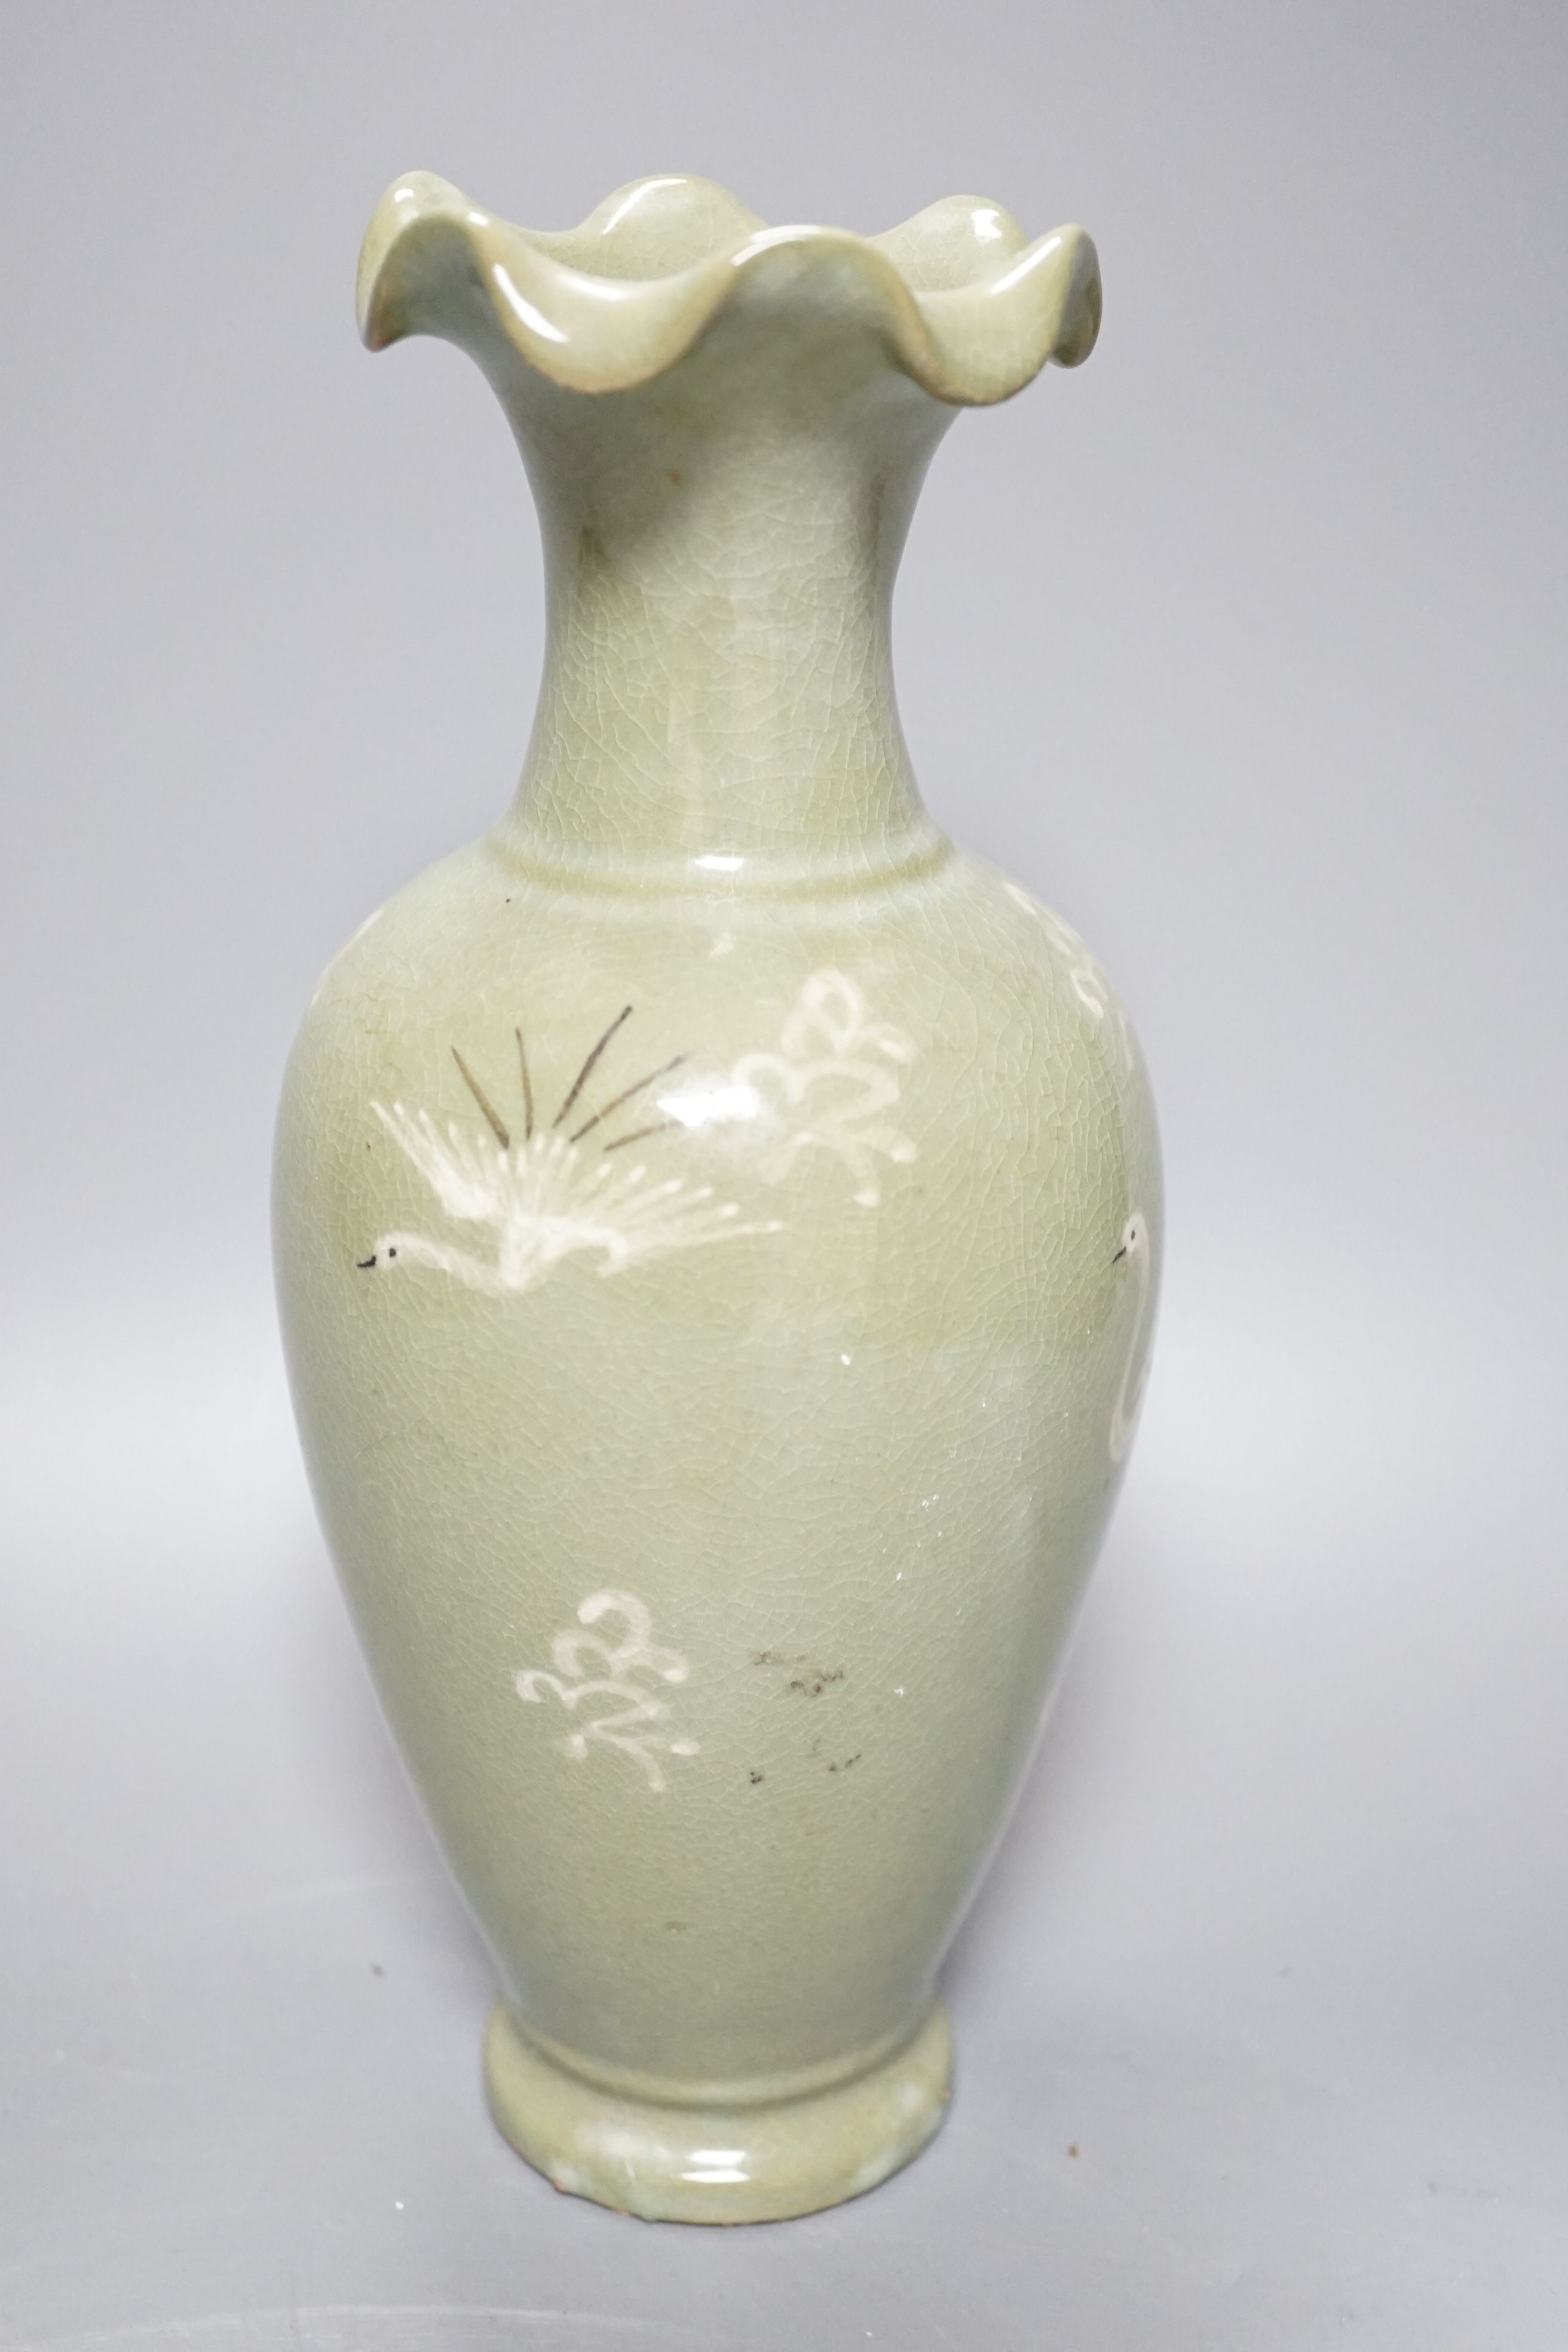 Mixed oriental wares including a Chinese arrow vase 32cm, ‘orean celadon vases and a Kutani type dish